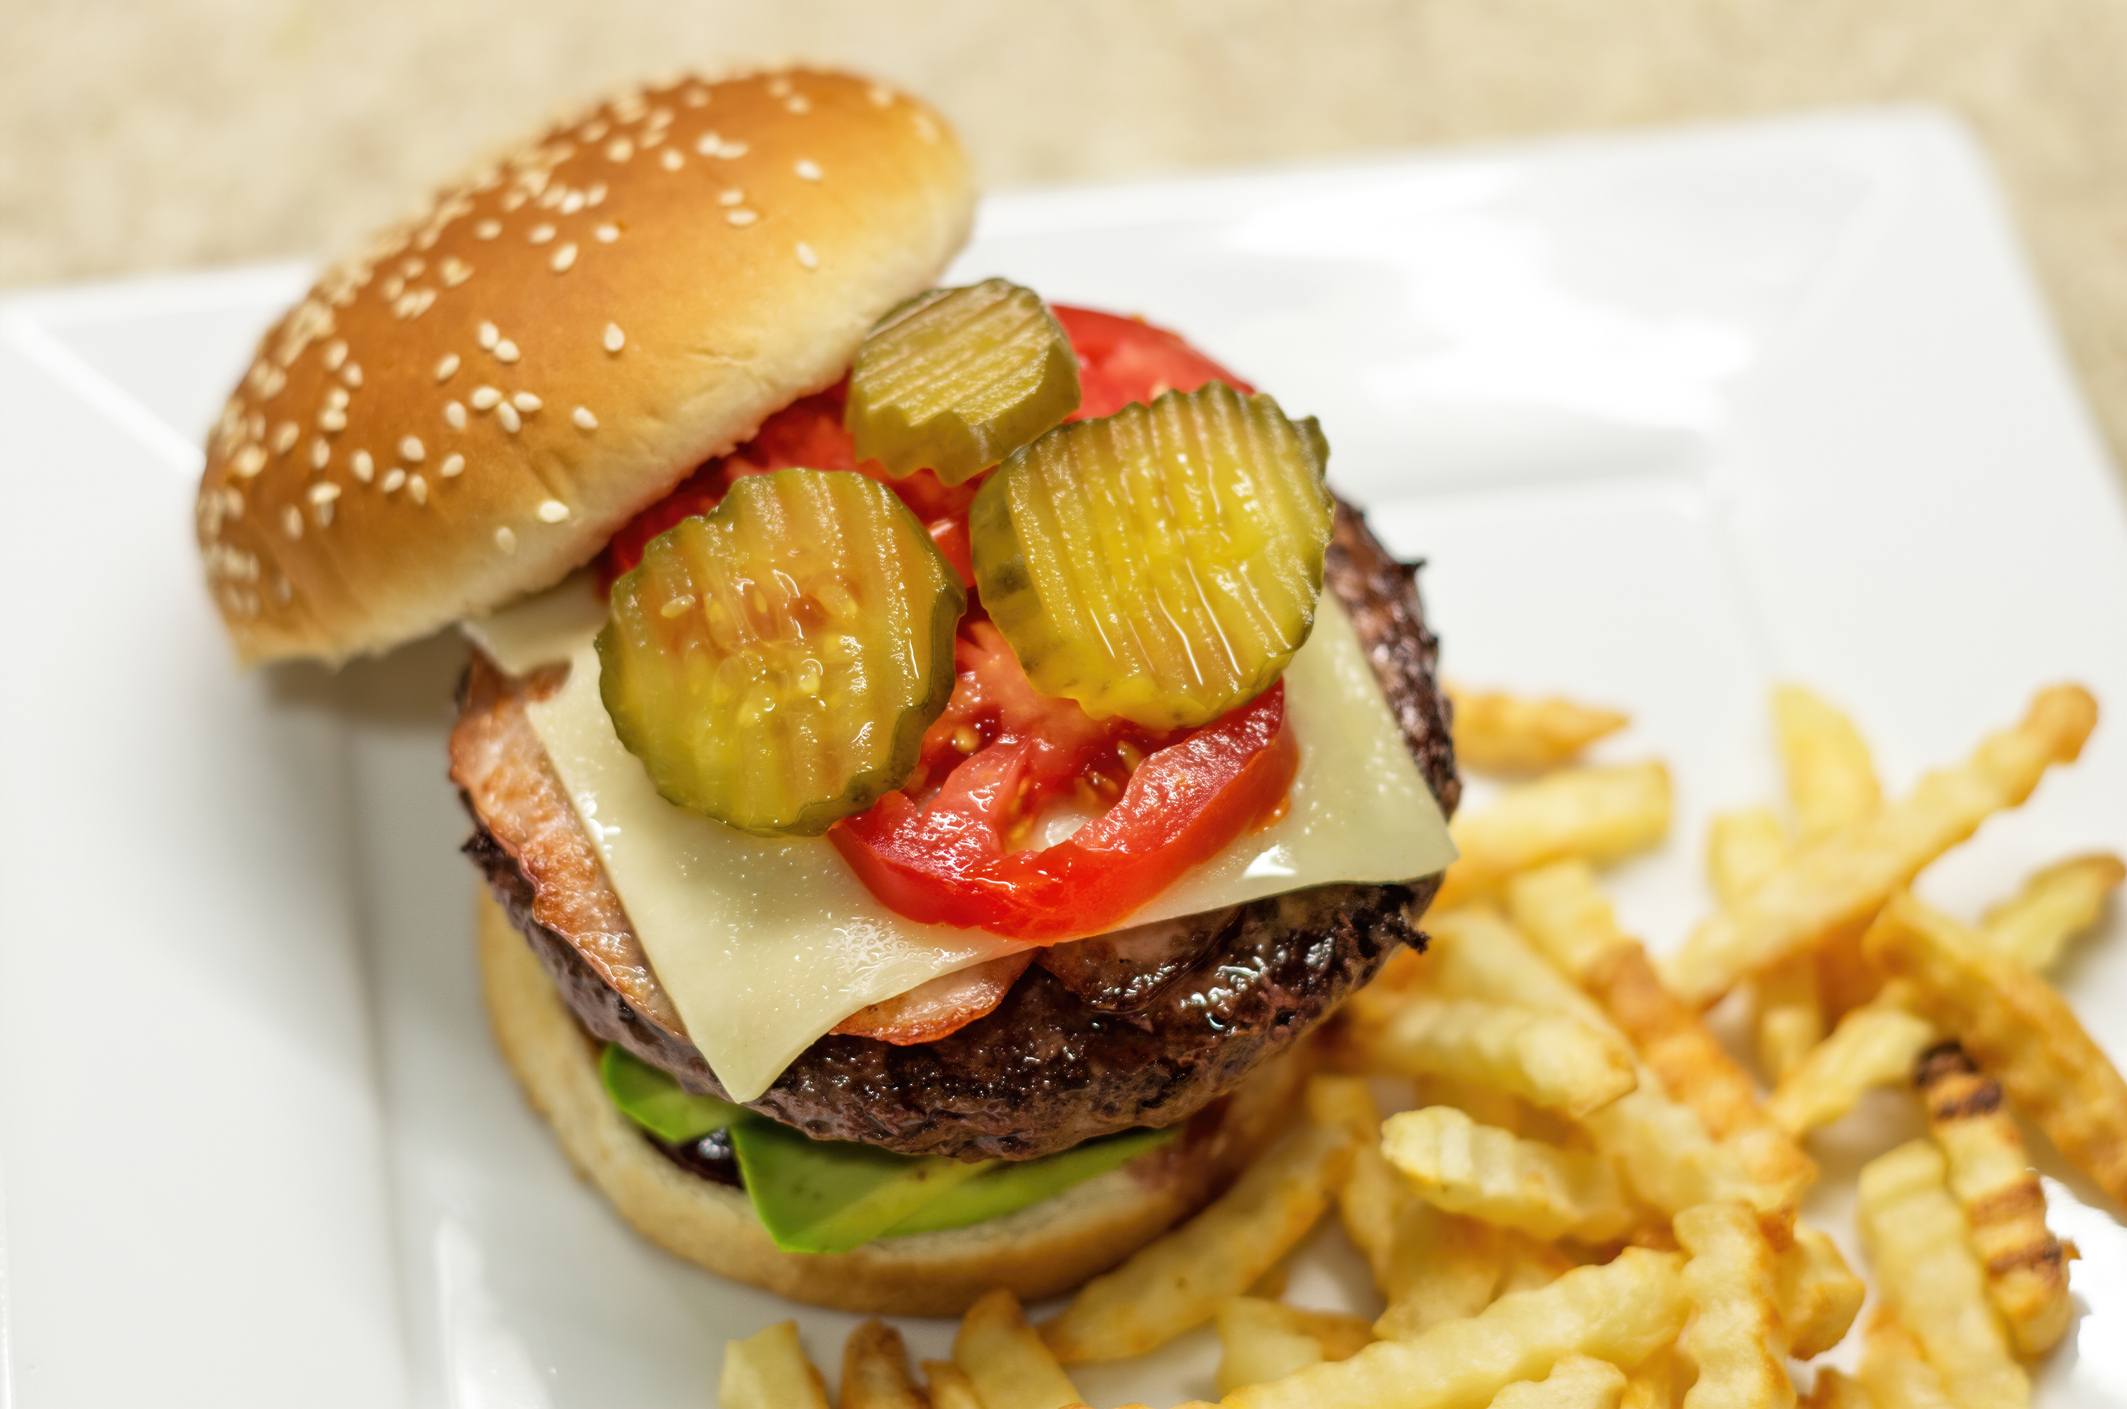 Cheeseburger with pickles, tomato, lettuce, patty on a plate with fries on the side